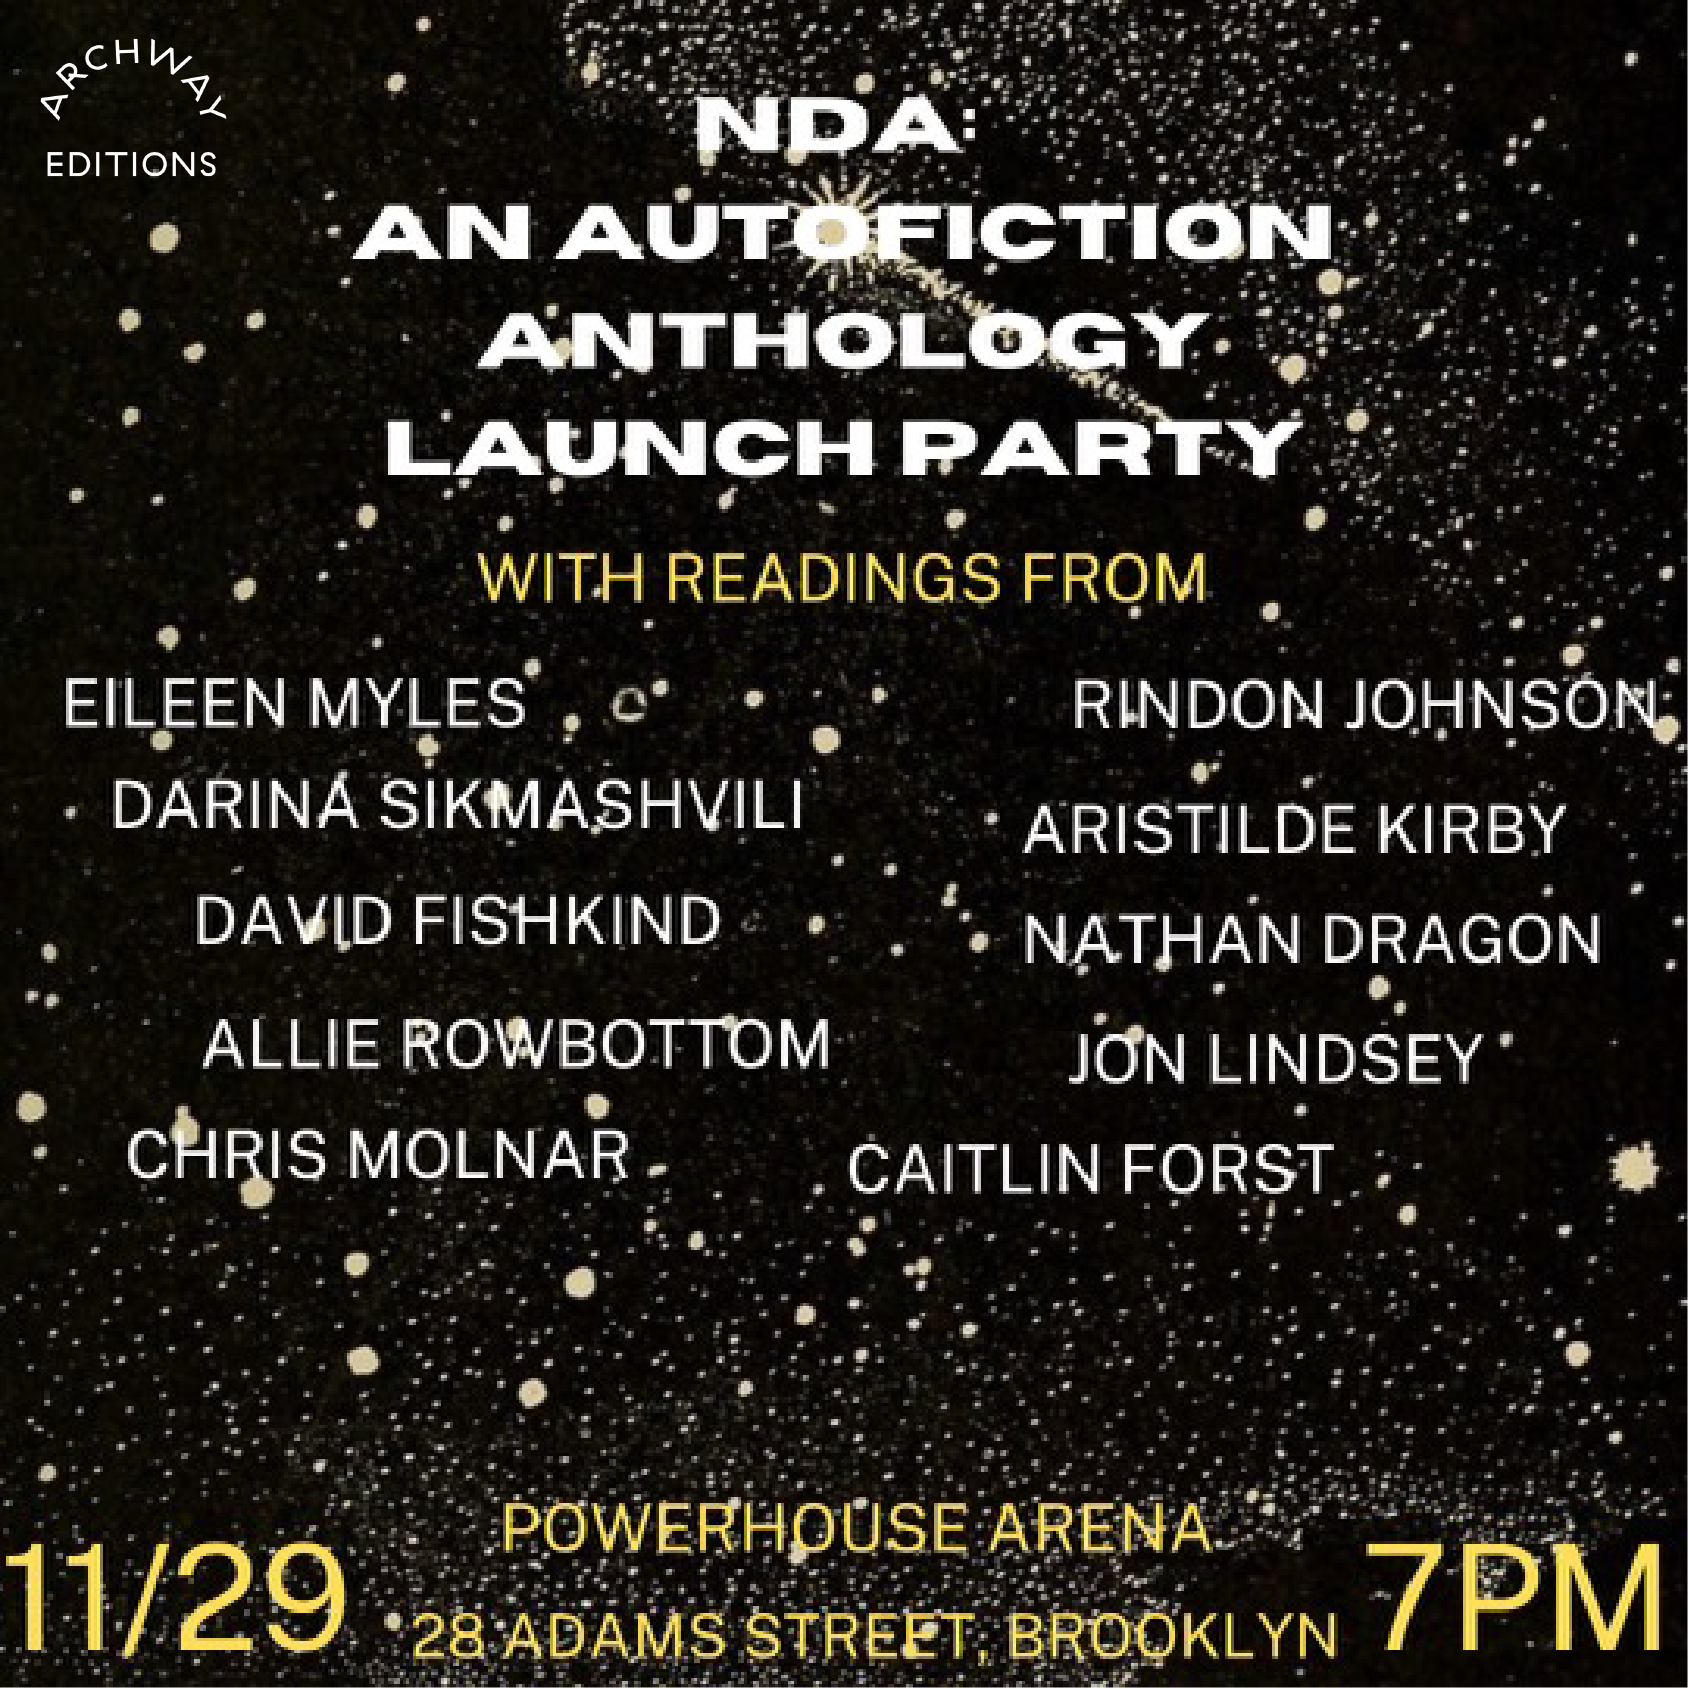 ARCHWAY EDITIONS presents NDA: An Autofiction Anthology Book Launch featuring Rindon Johnson, Allie Rowbottom, Jon Lindsey, Eileen Myles and more